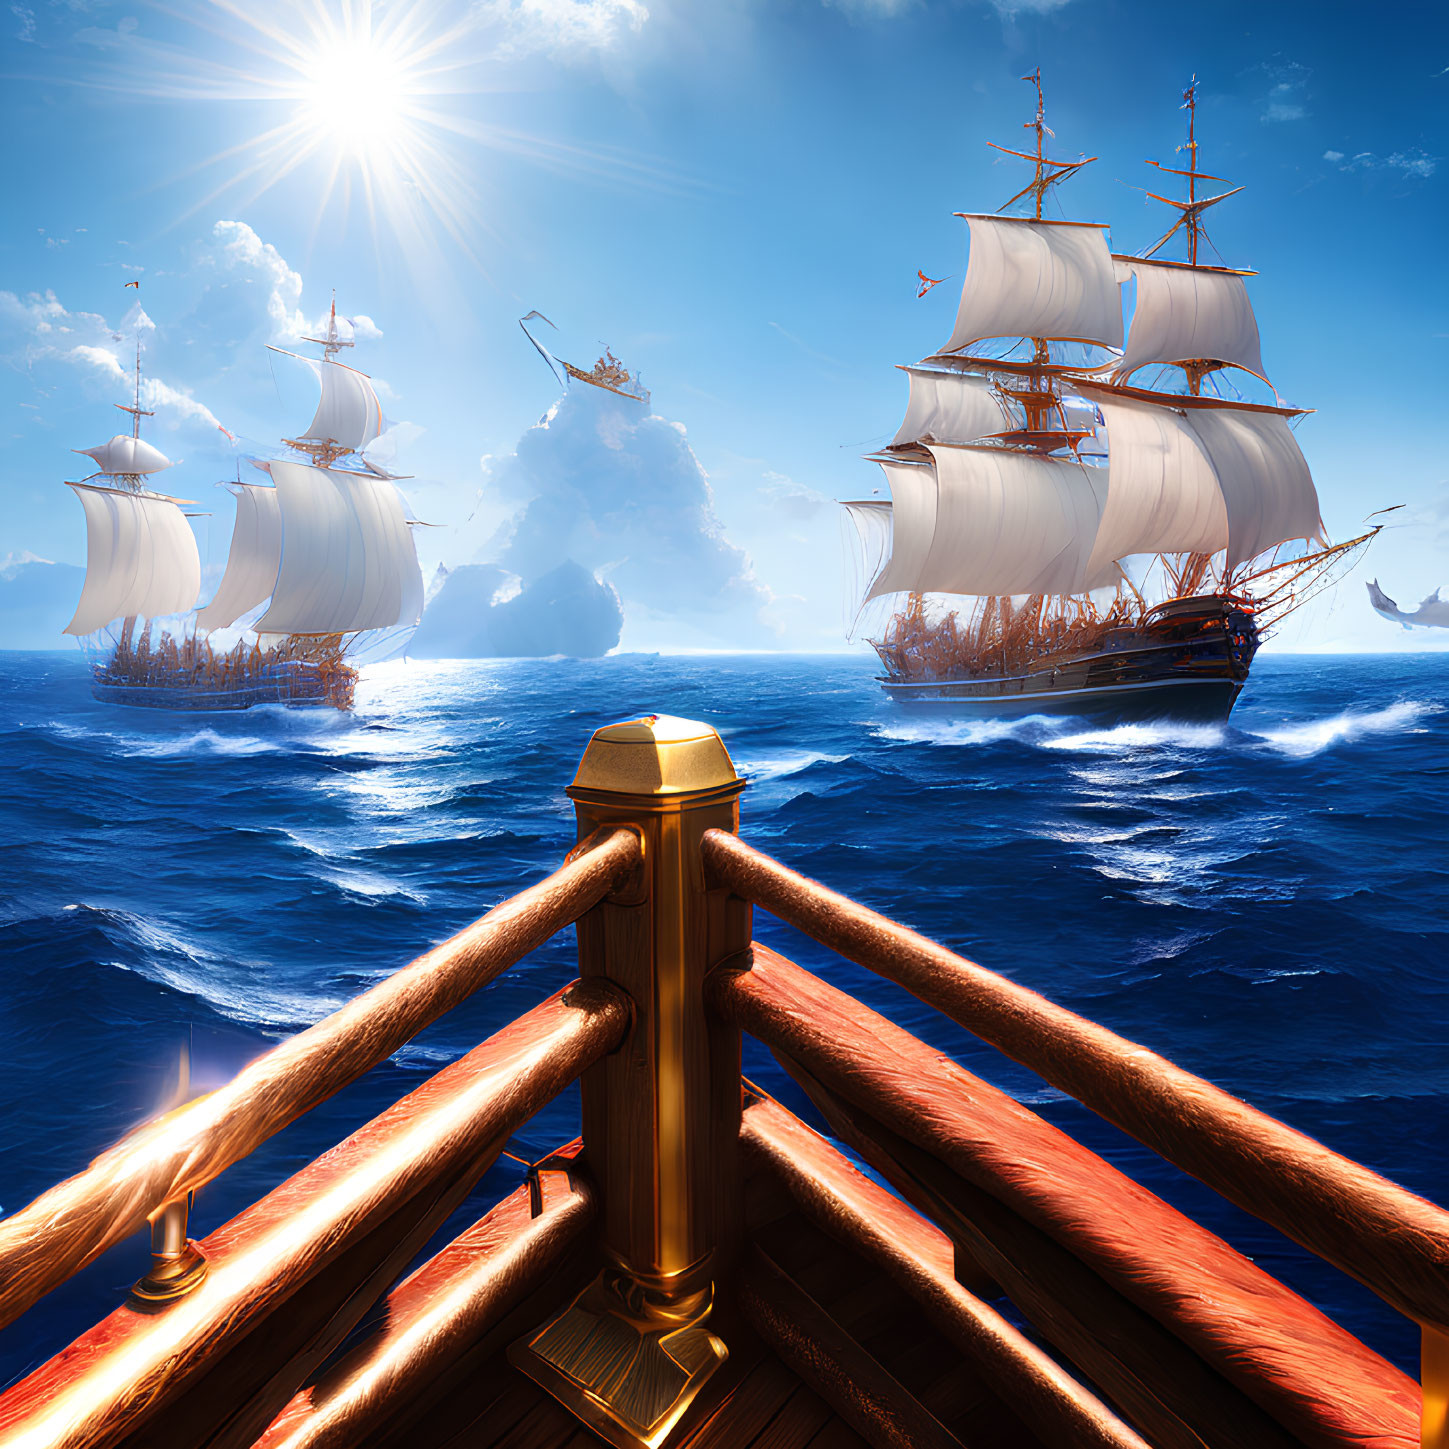 Sunny ocean view: tall ships with billowing sails and rock formations